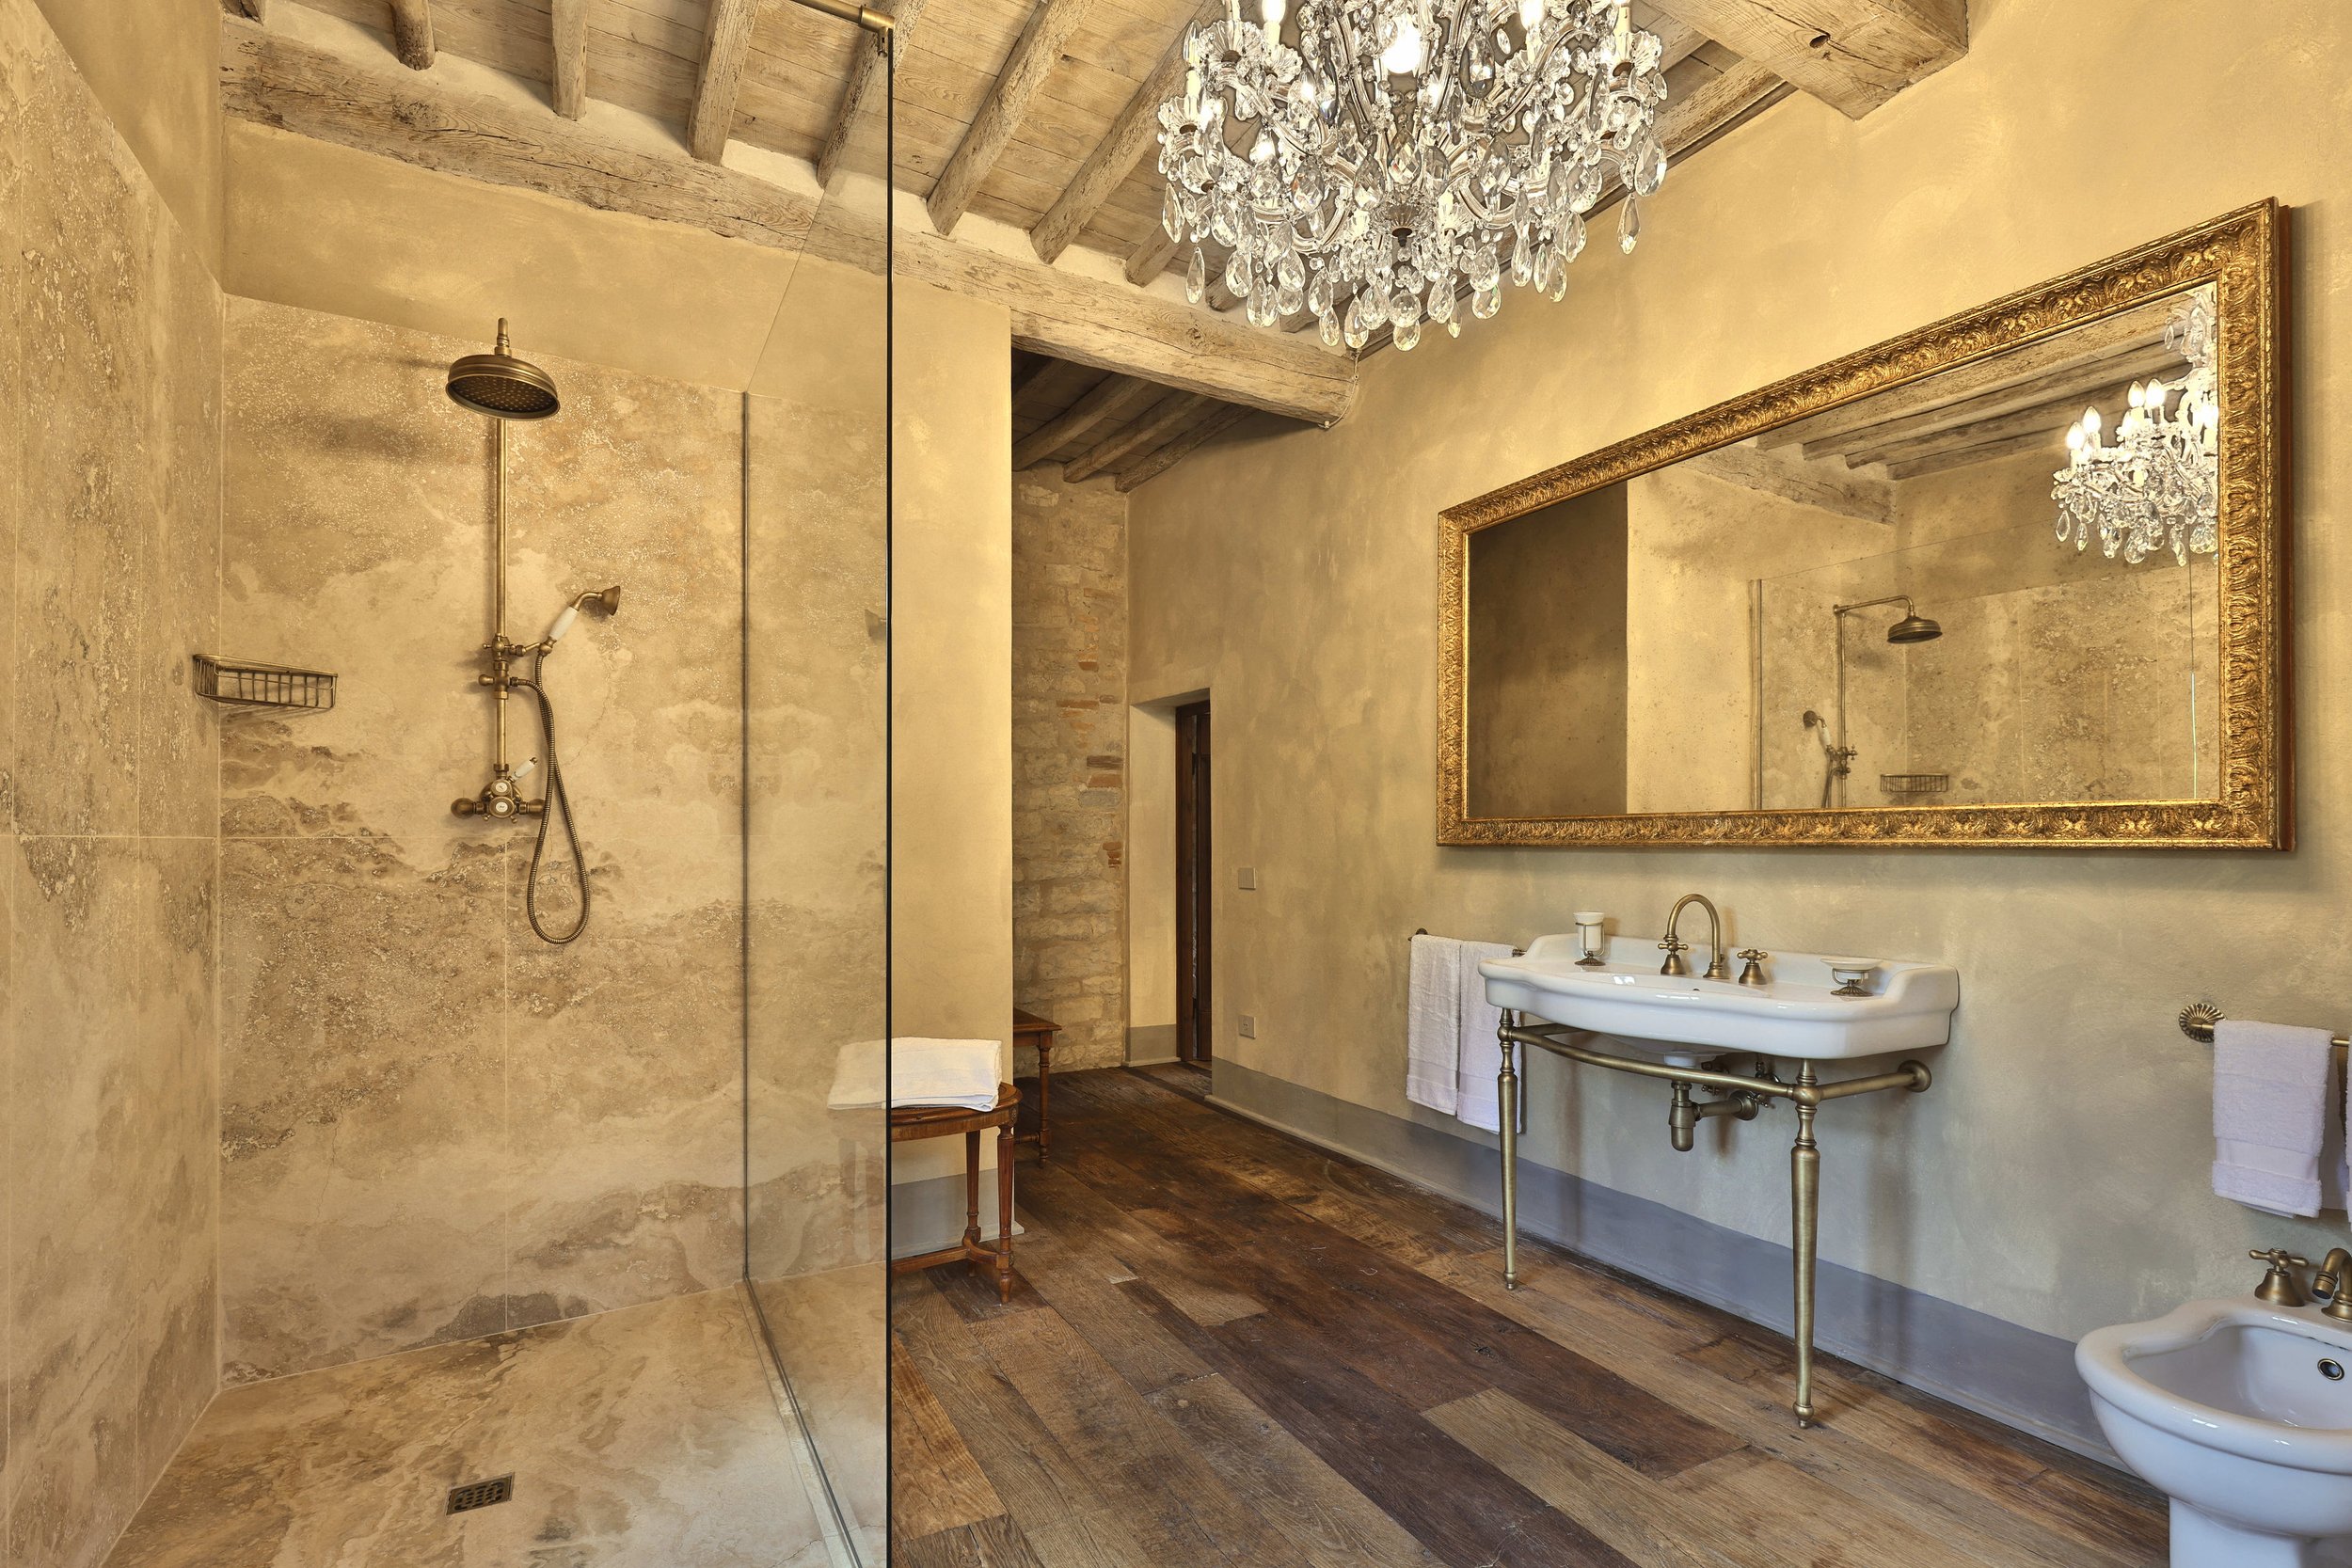 Francis York NEW Luxury Holiday Rental in the Chianti Hills, Tuscany Booking This Summer  3.jpg